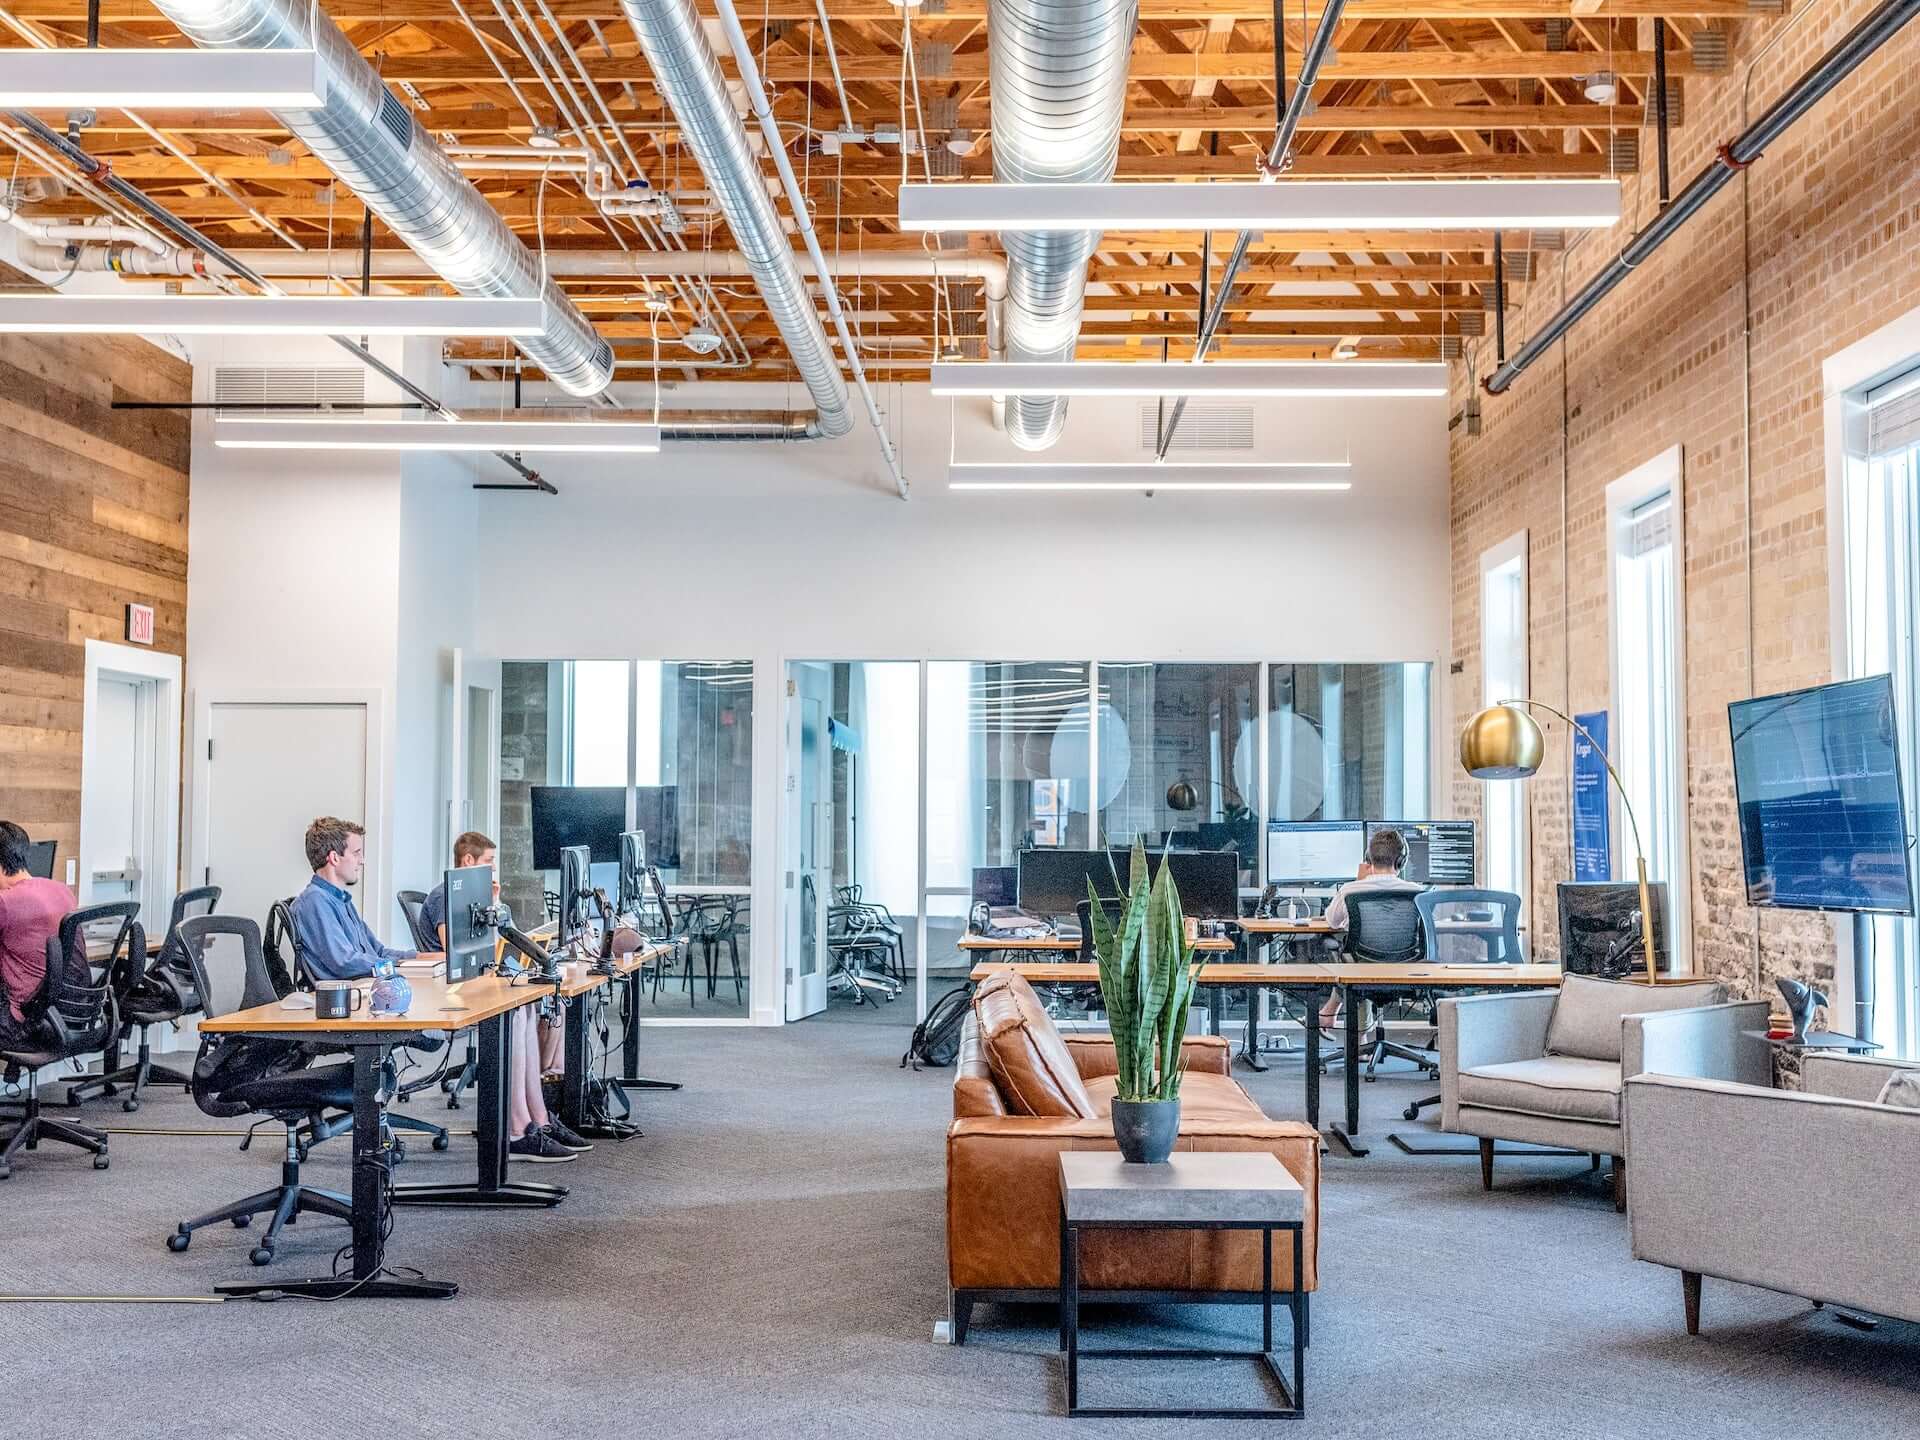 An open plan office in an industrial-style building.